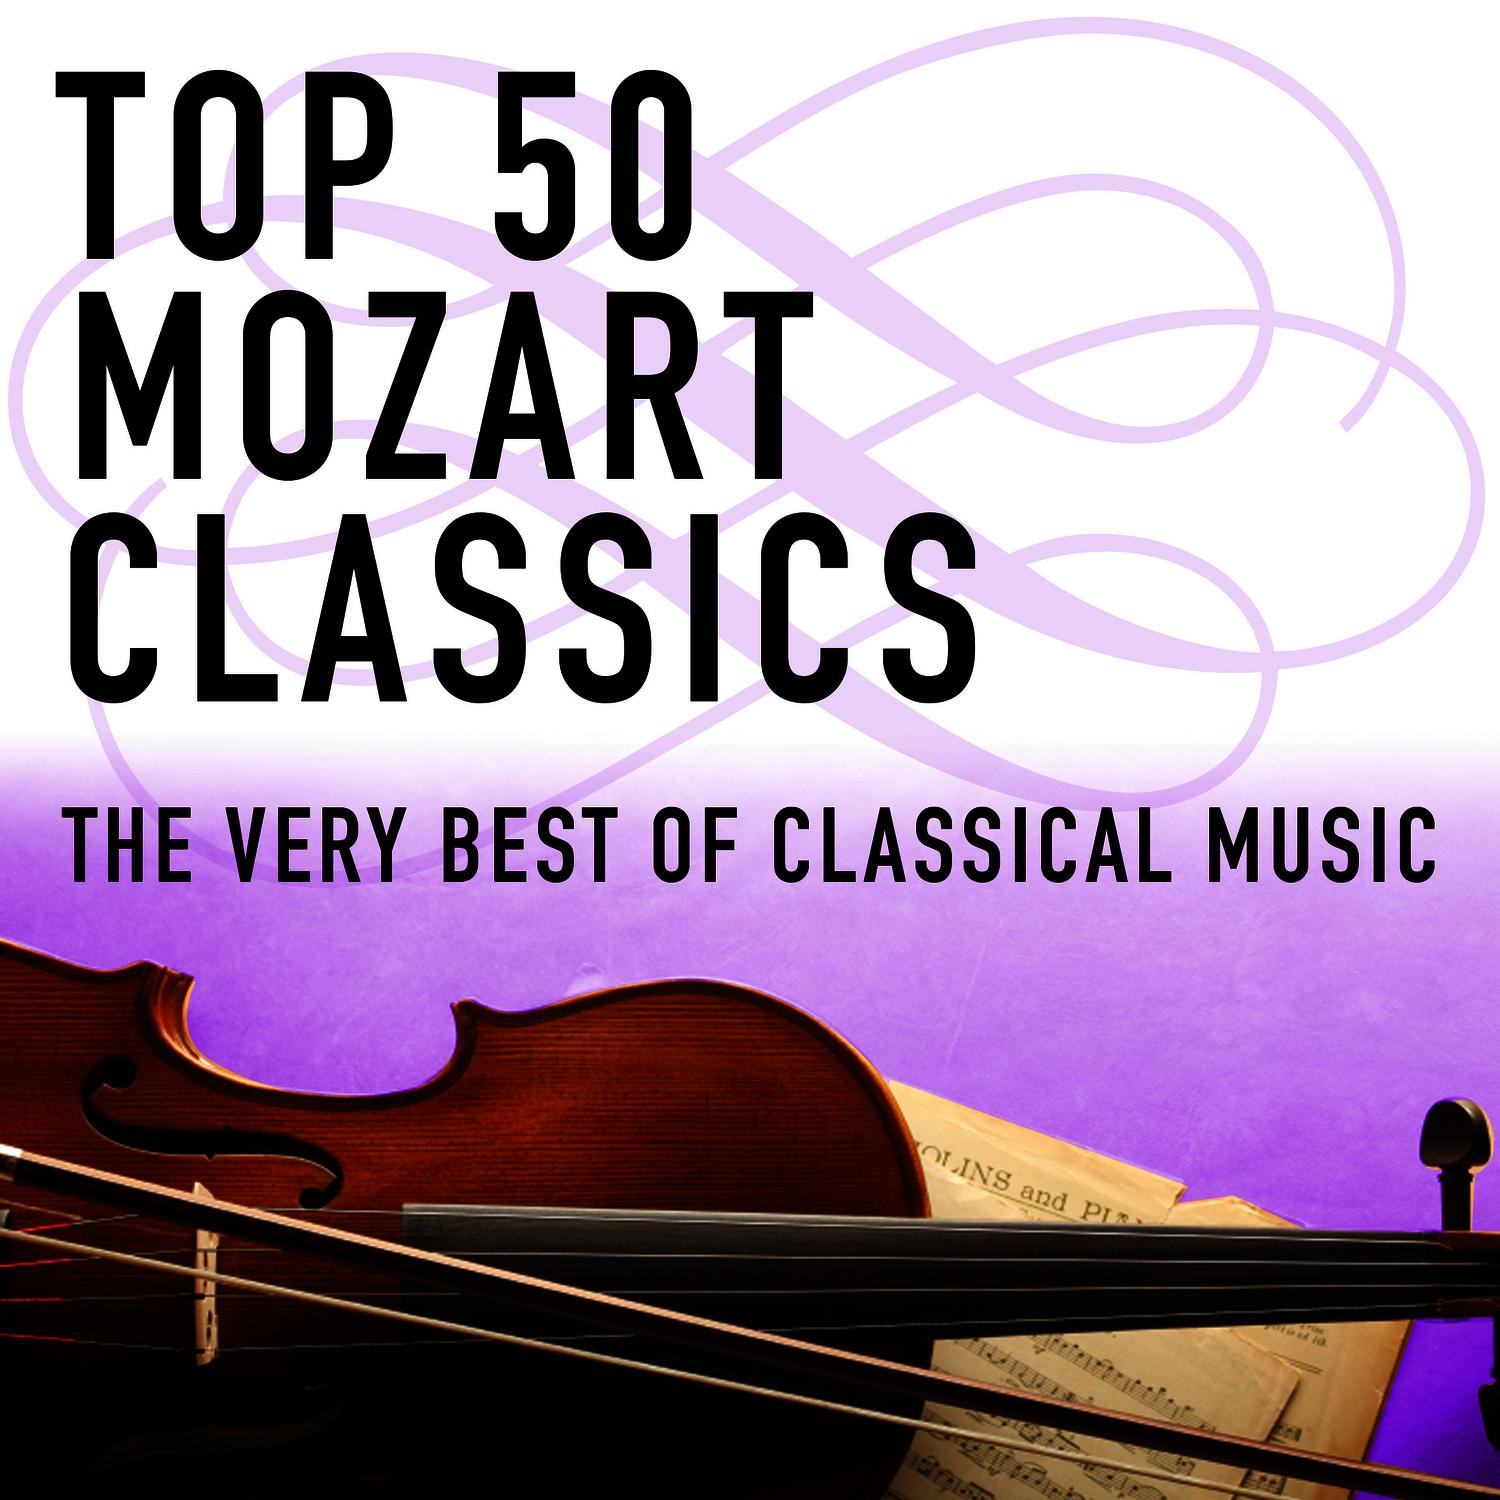 Top 50 Mozart Classics - The Very Best of Classical Music